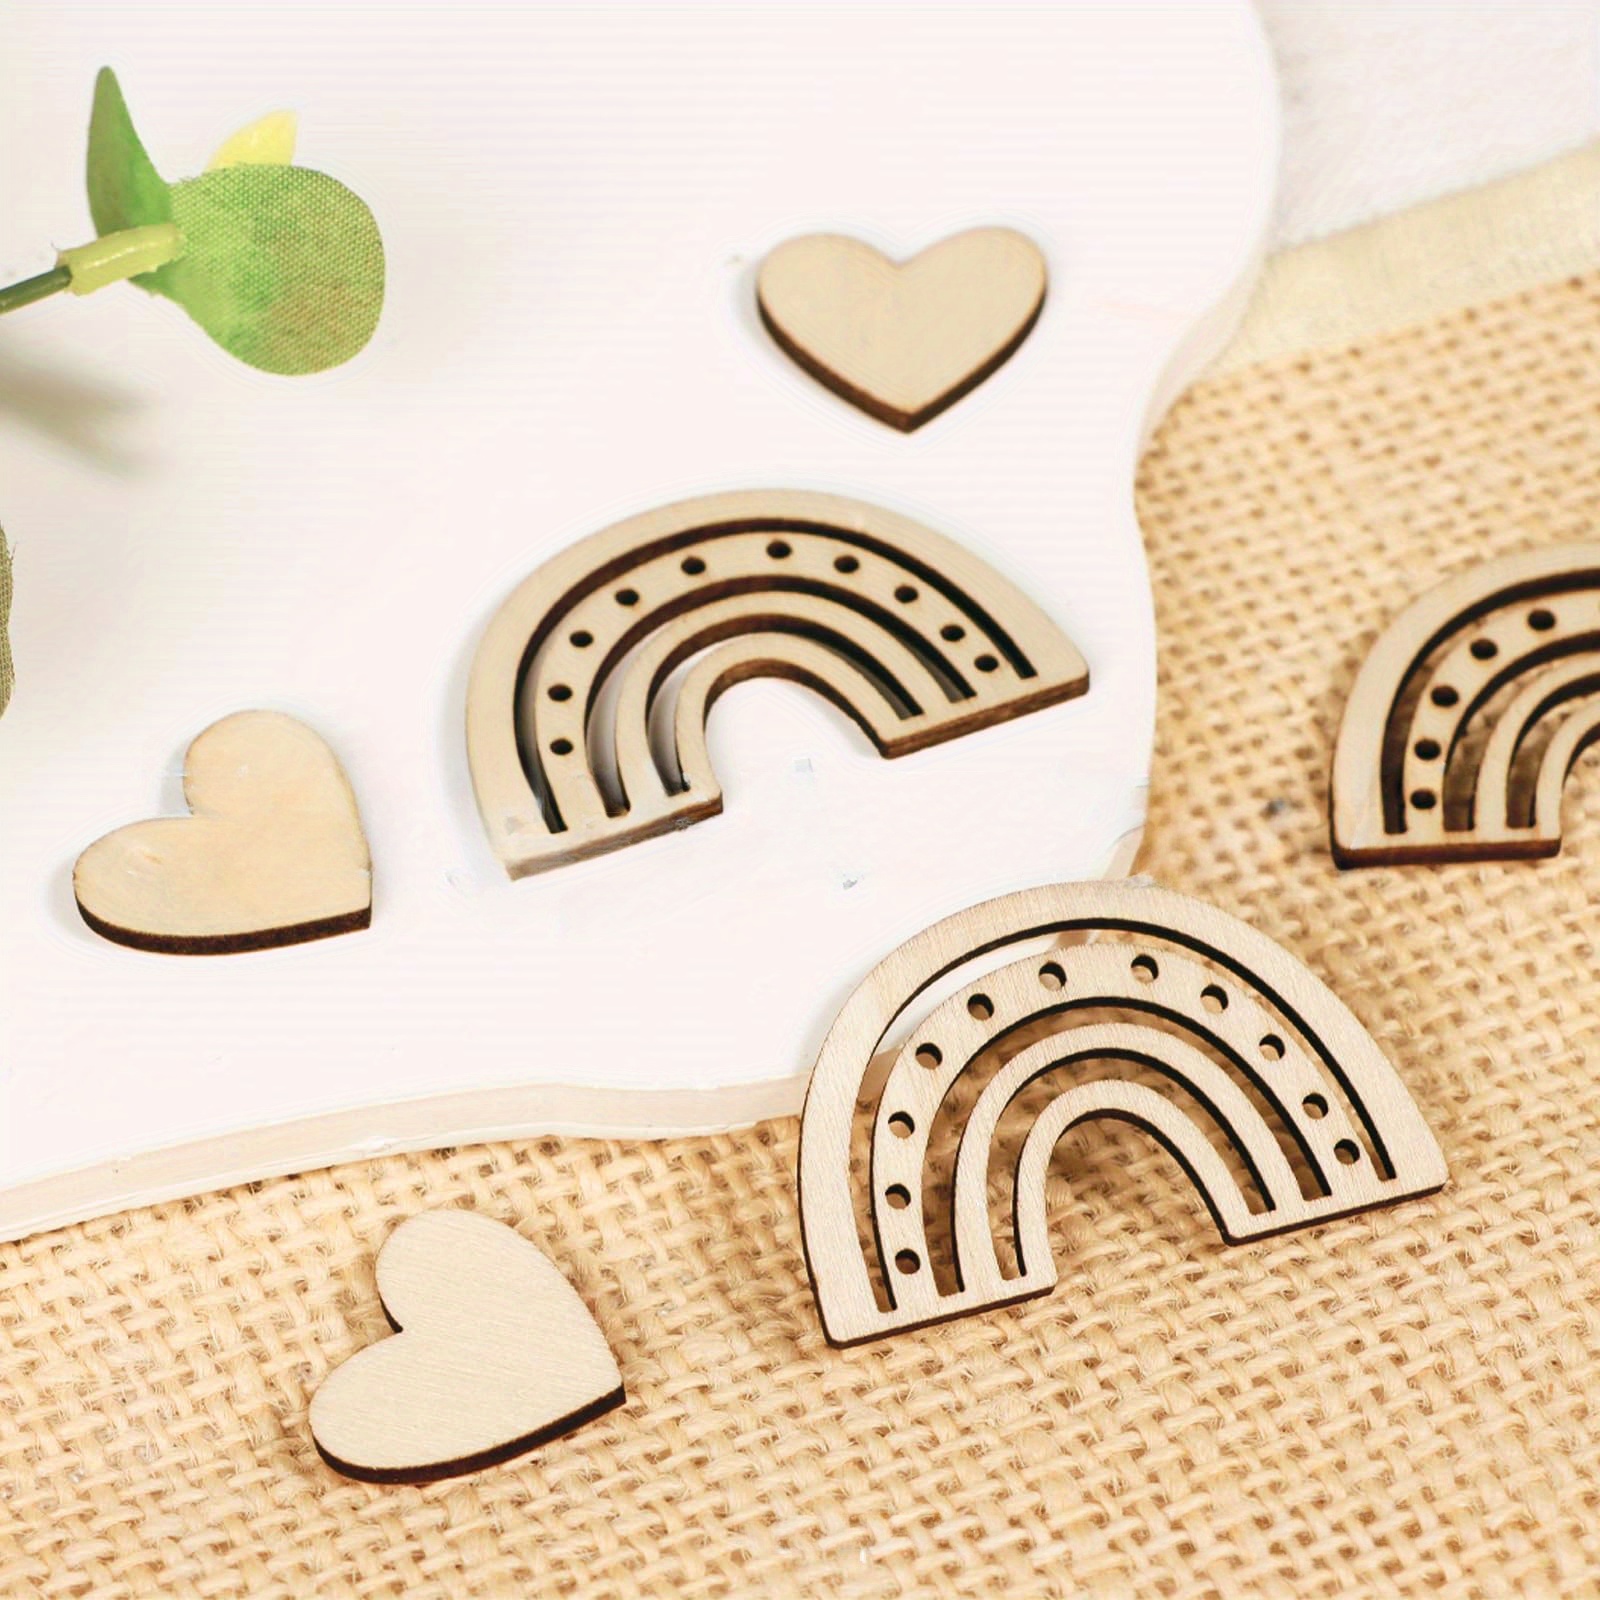 

Wooden Rainbow & Wood Heart Cutouts Unfinished Blank Wooden Hearts Shapes Wood Slices Tags For Crafts For Wedding Guest Book, Valentine's Day, Thanksgiving, Diy Card Decorations Making